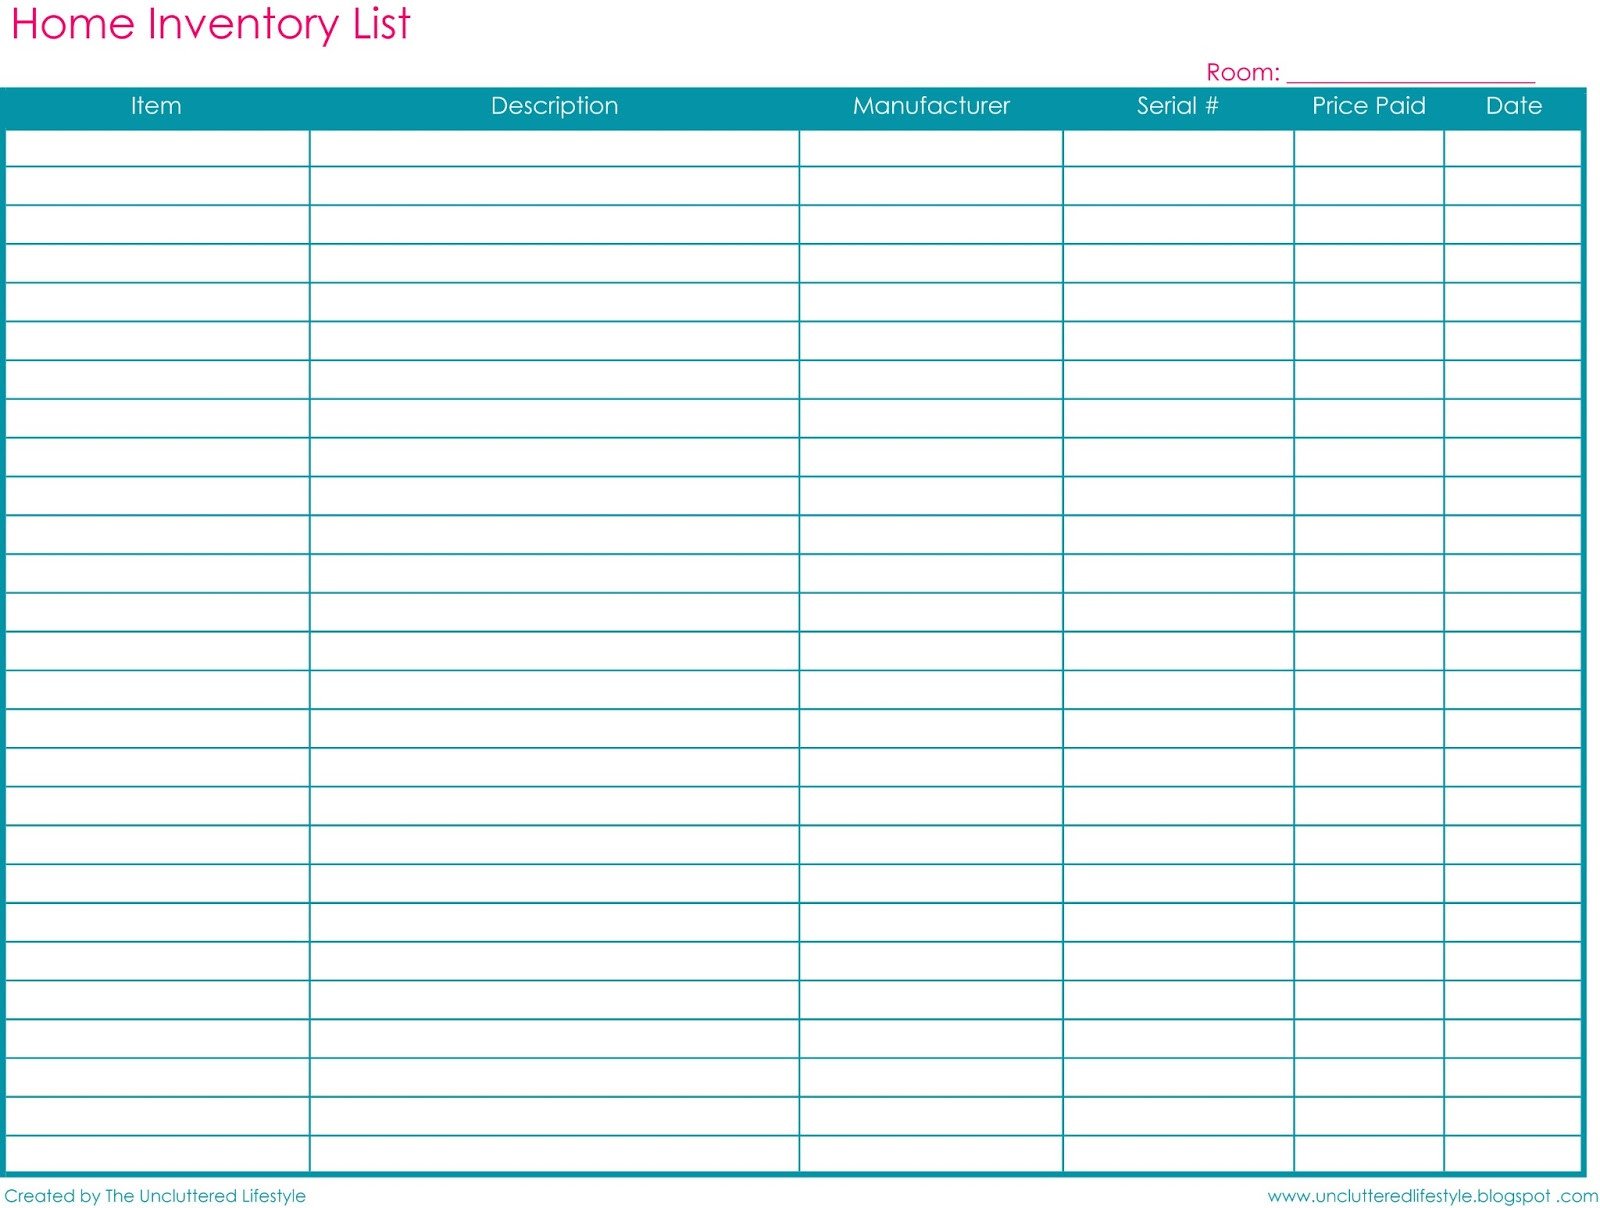 Household Inventory List Template Finally Here Home Management Binder Printables Find